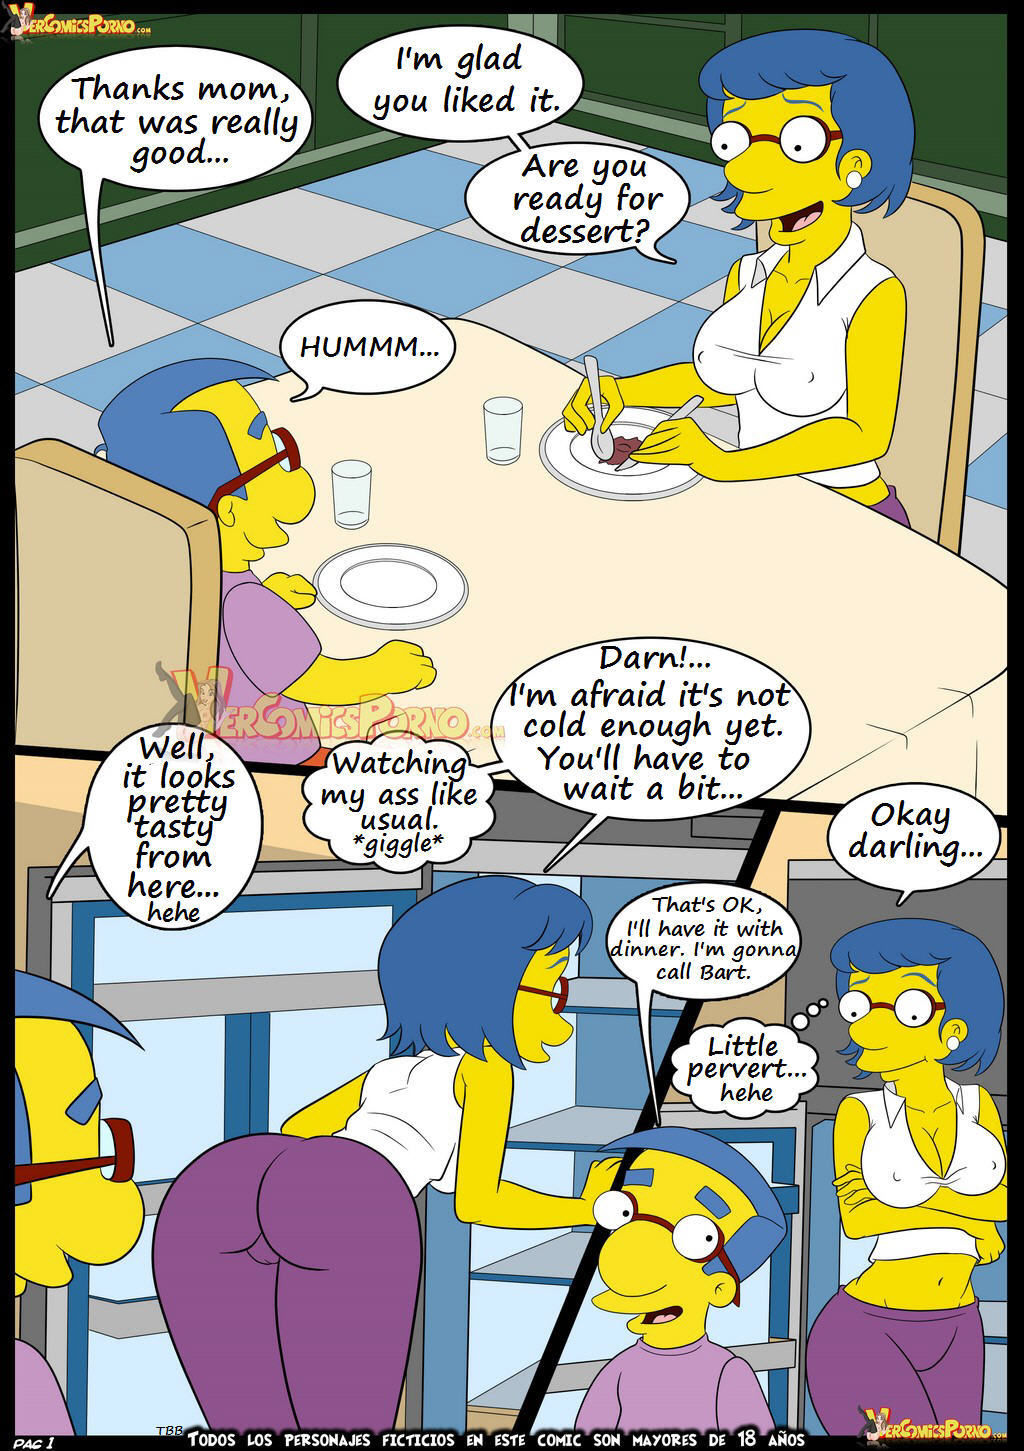 Croc,The Simpsons Learning with Mom-English page 2